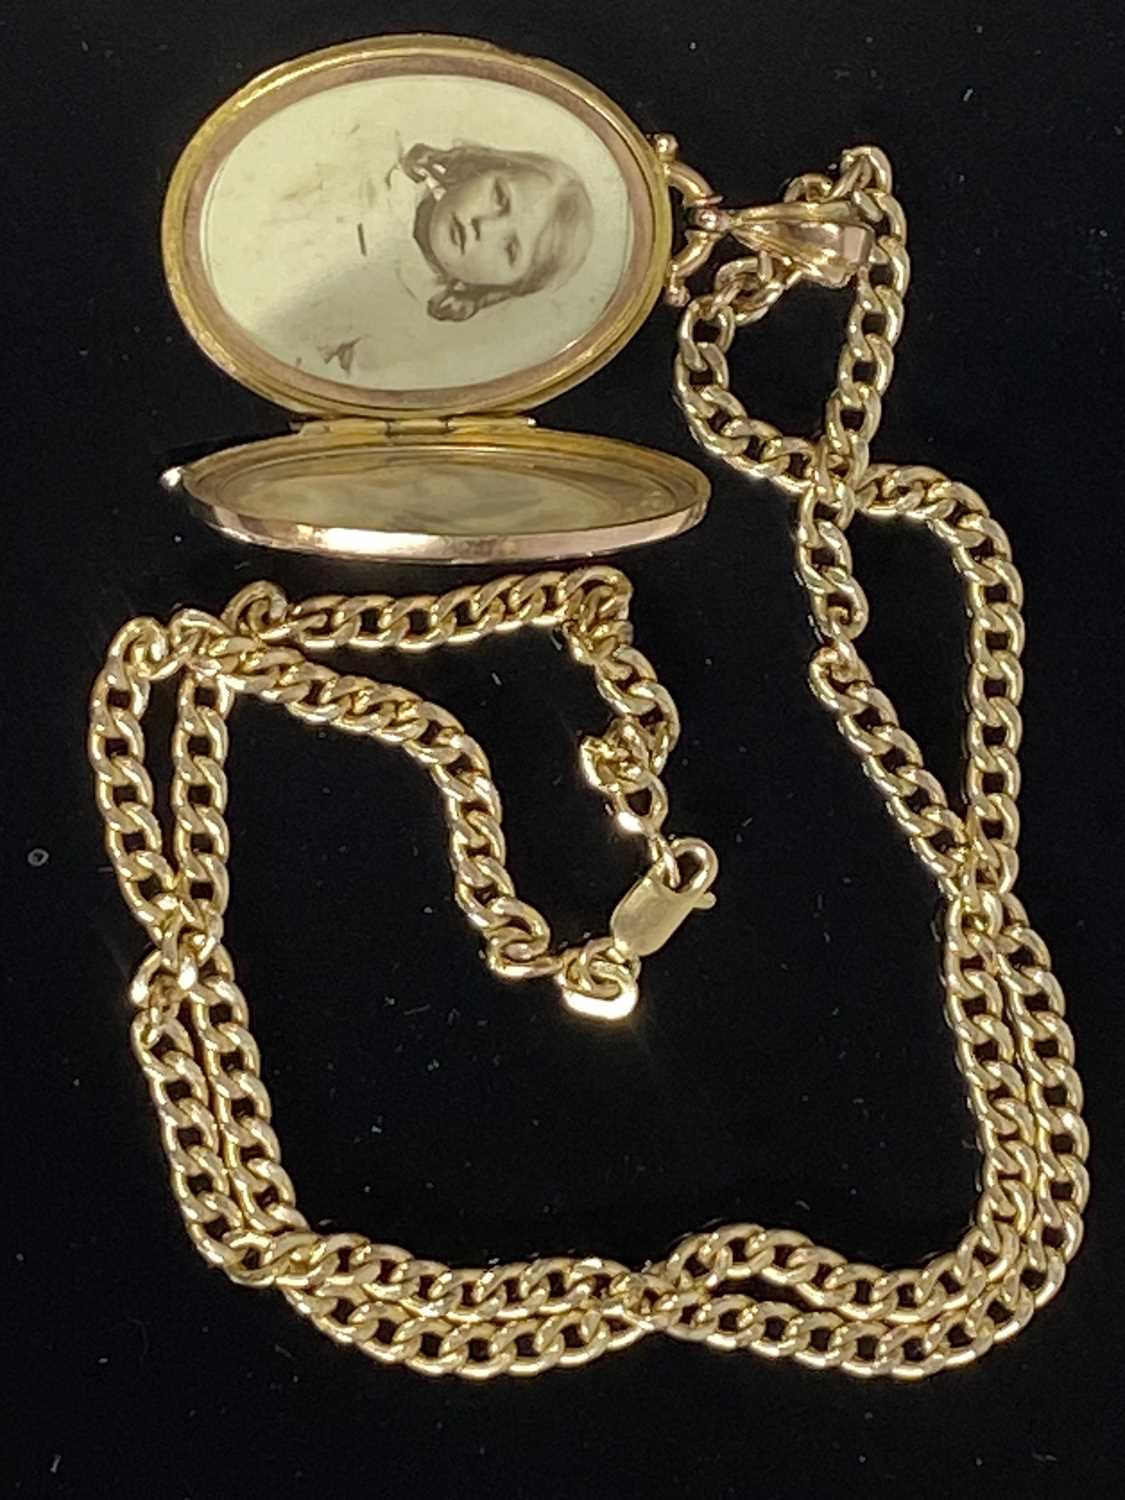 9CT GOLD OVAL LOCKET & A FLAT CURB LINK NECKLACE, 5cms (l) including hanging loop the locket, - Image 2 of 2